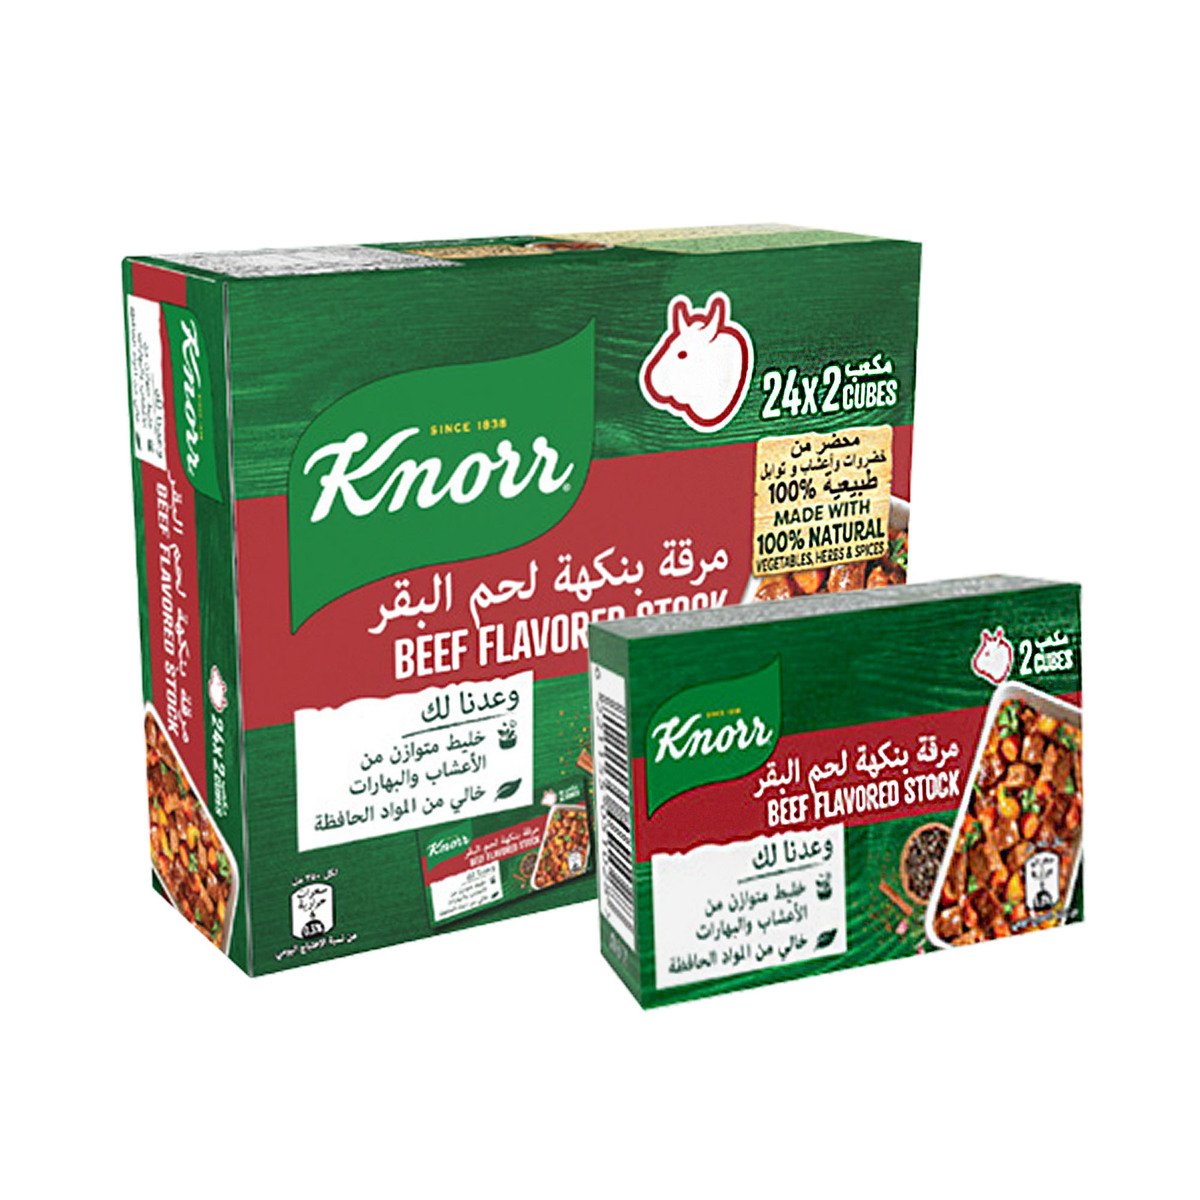 Knorr Beef Stock Cube 18 g